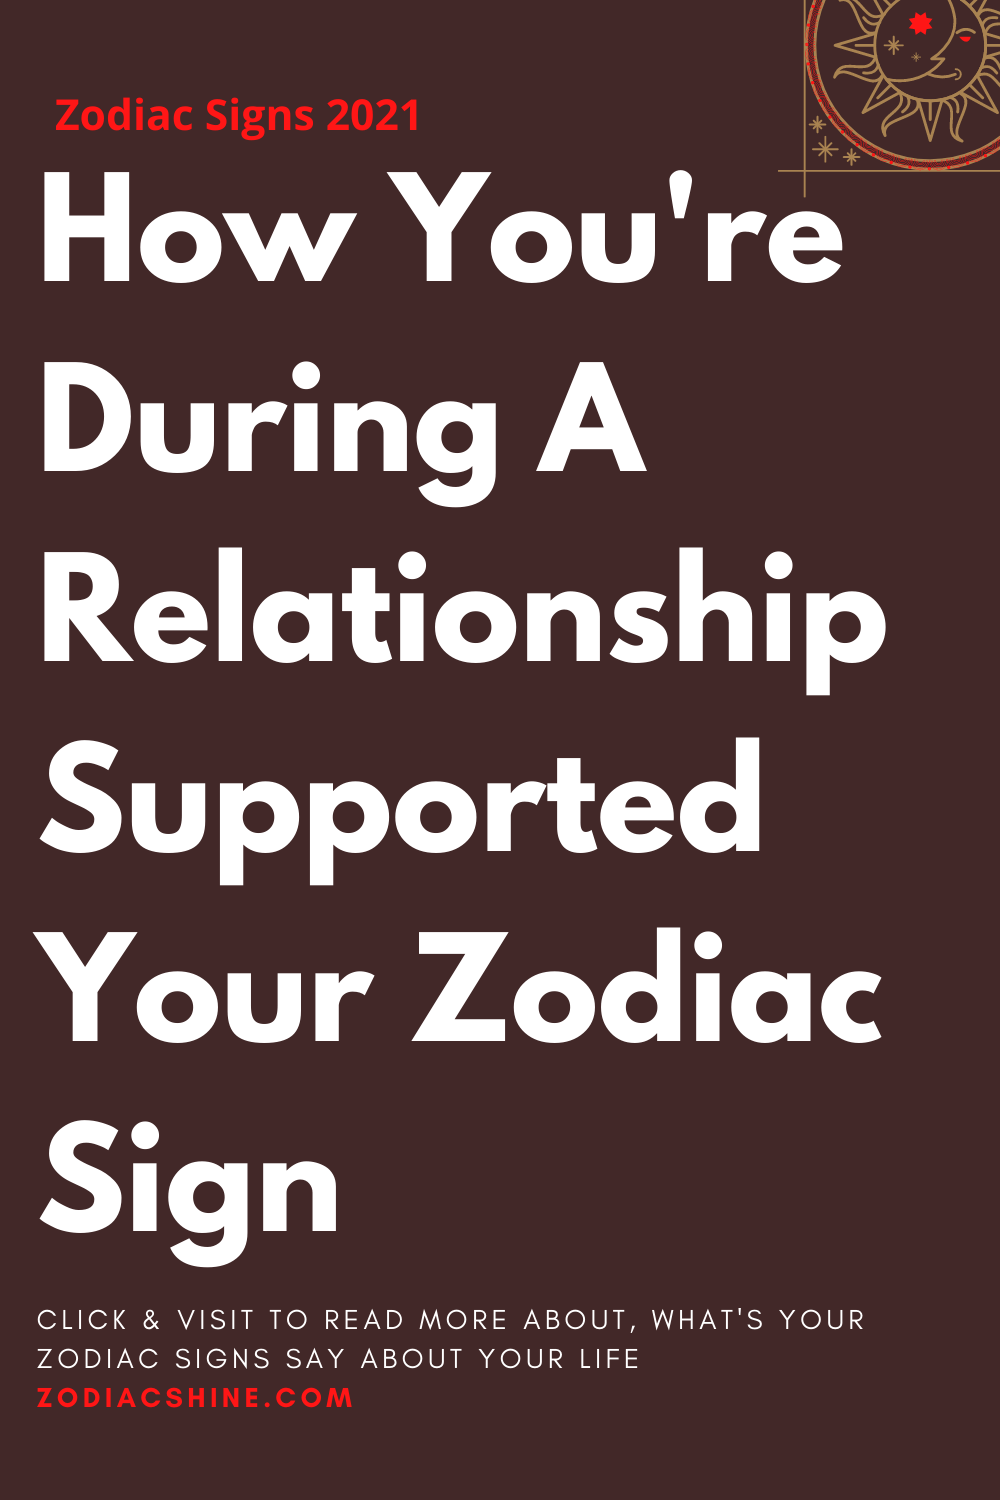 How You're During A Relationship Supported Your Zodiac Sign